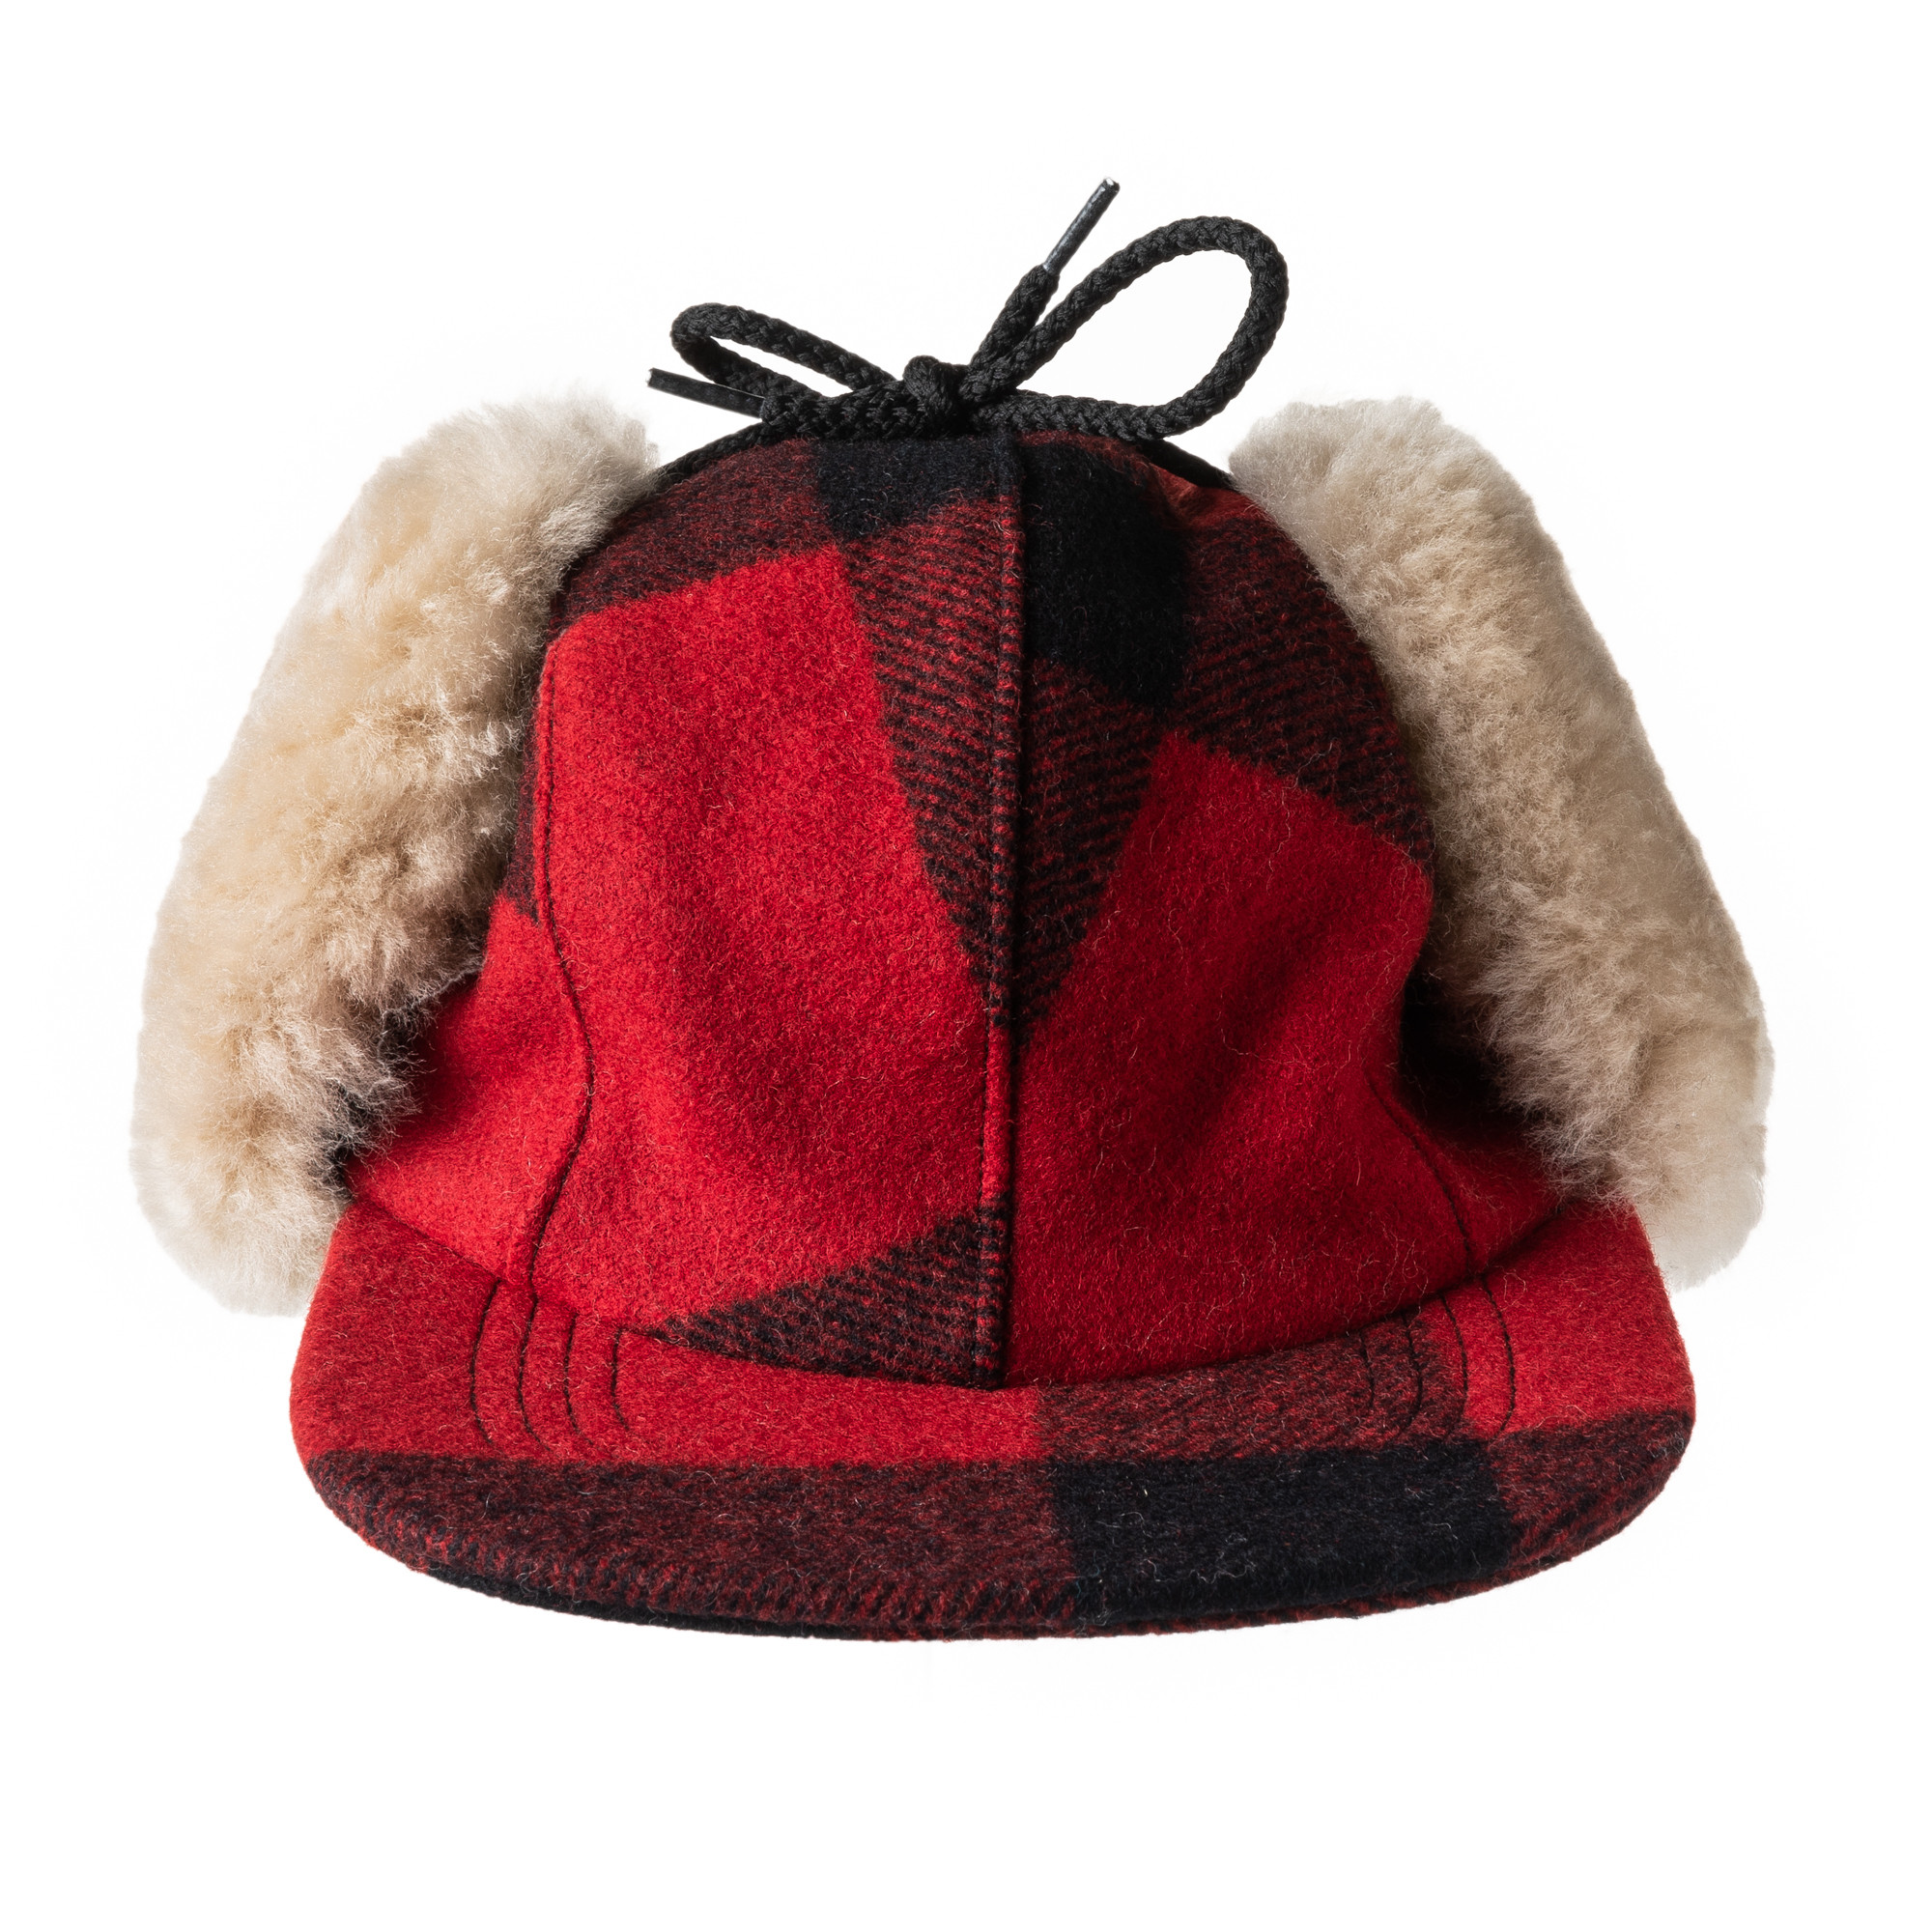 Filson Double Mackinaw Cap in Red & Black Check